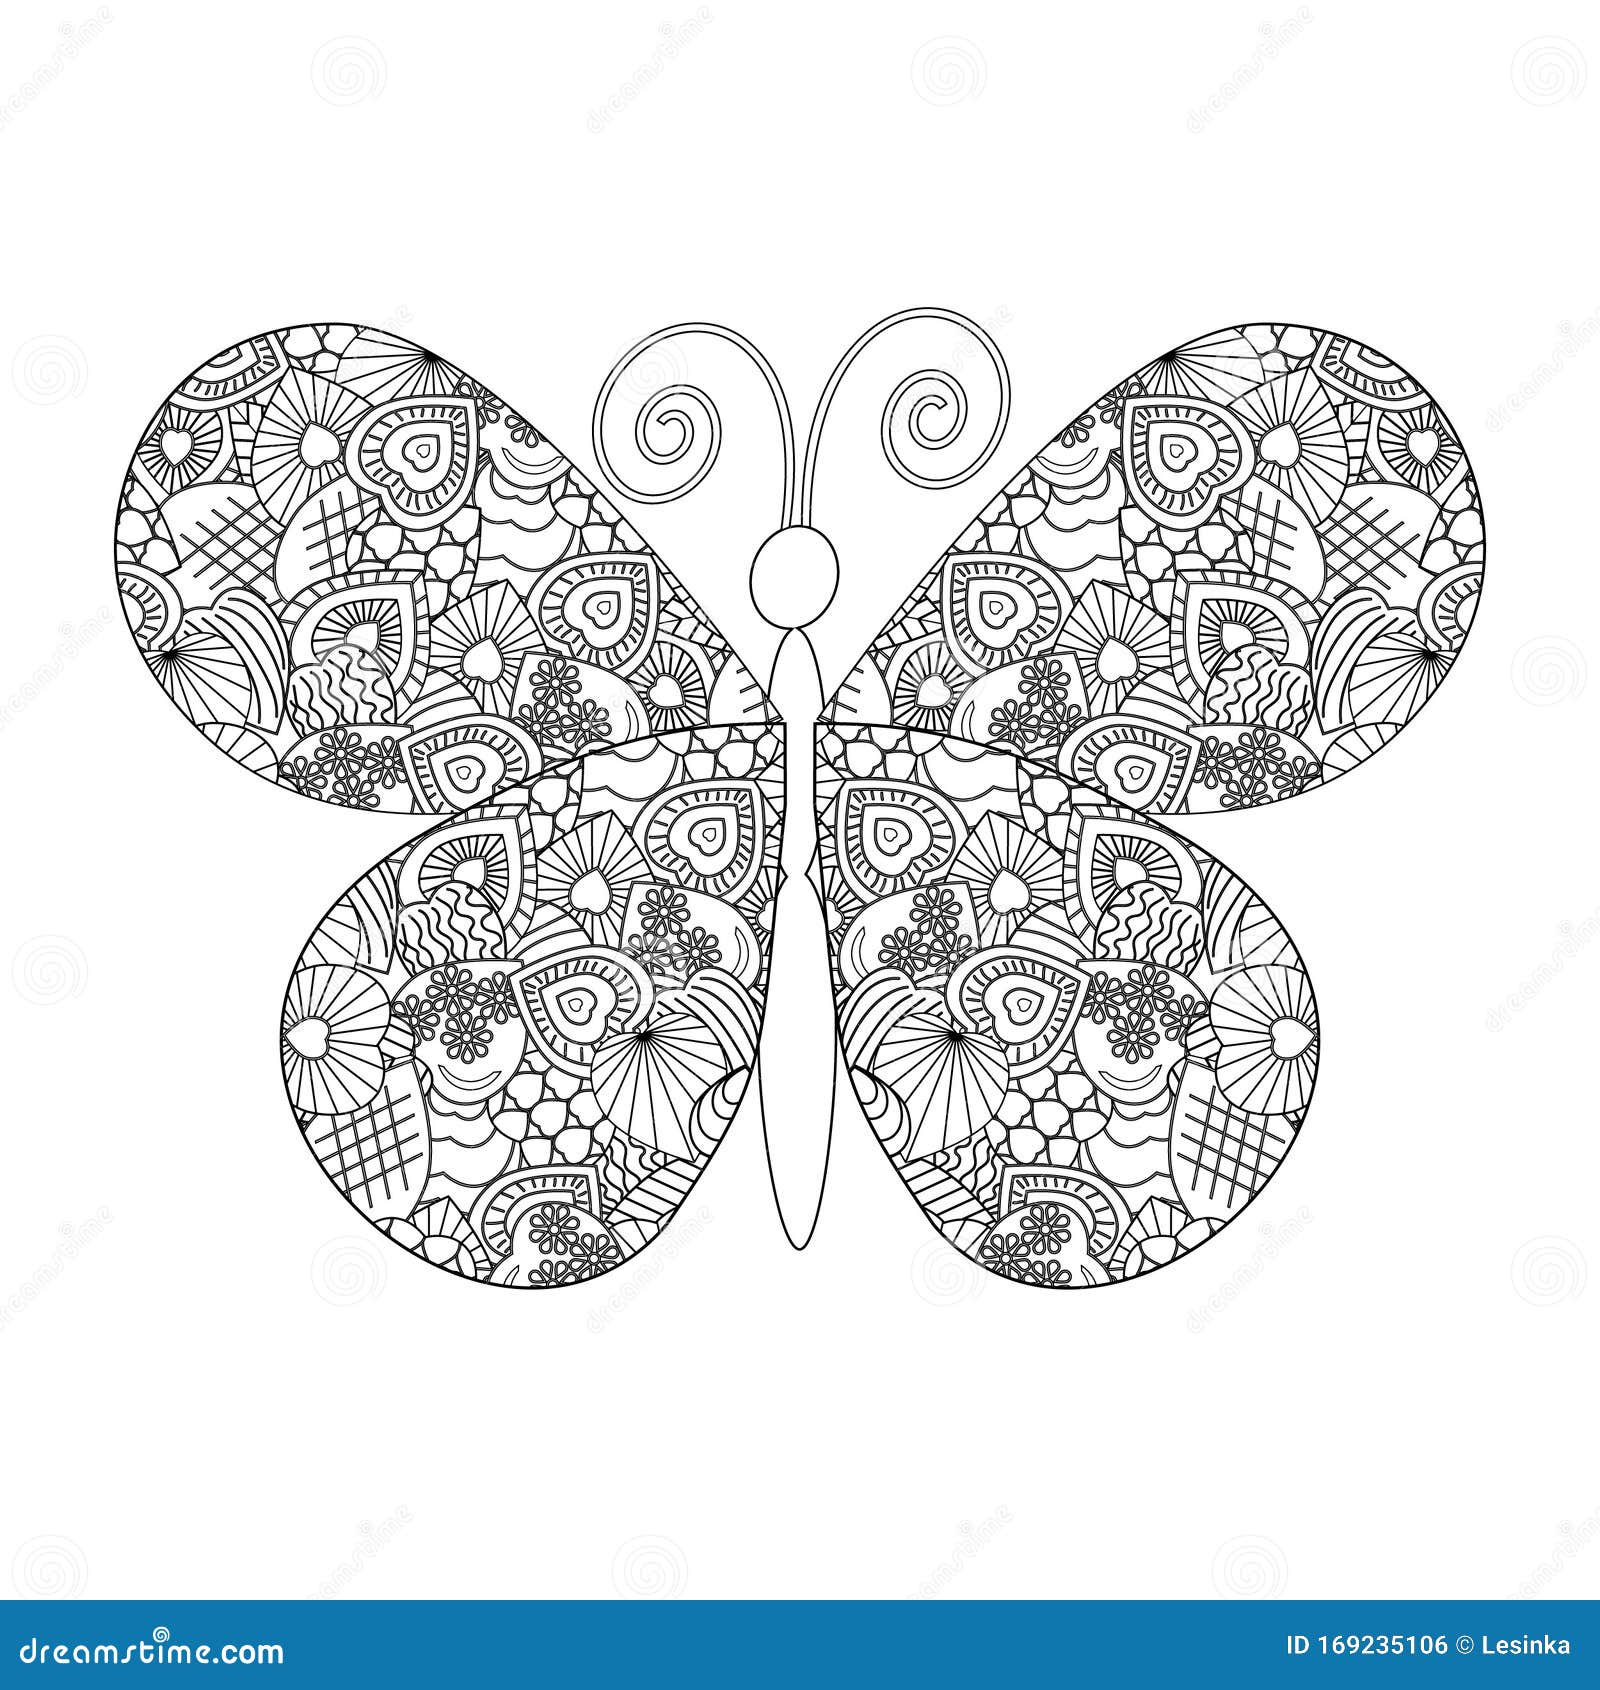 Butterfly-coloring-in-collage-style-background-white-outline-black ...